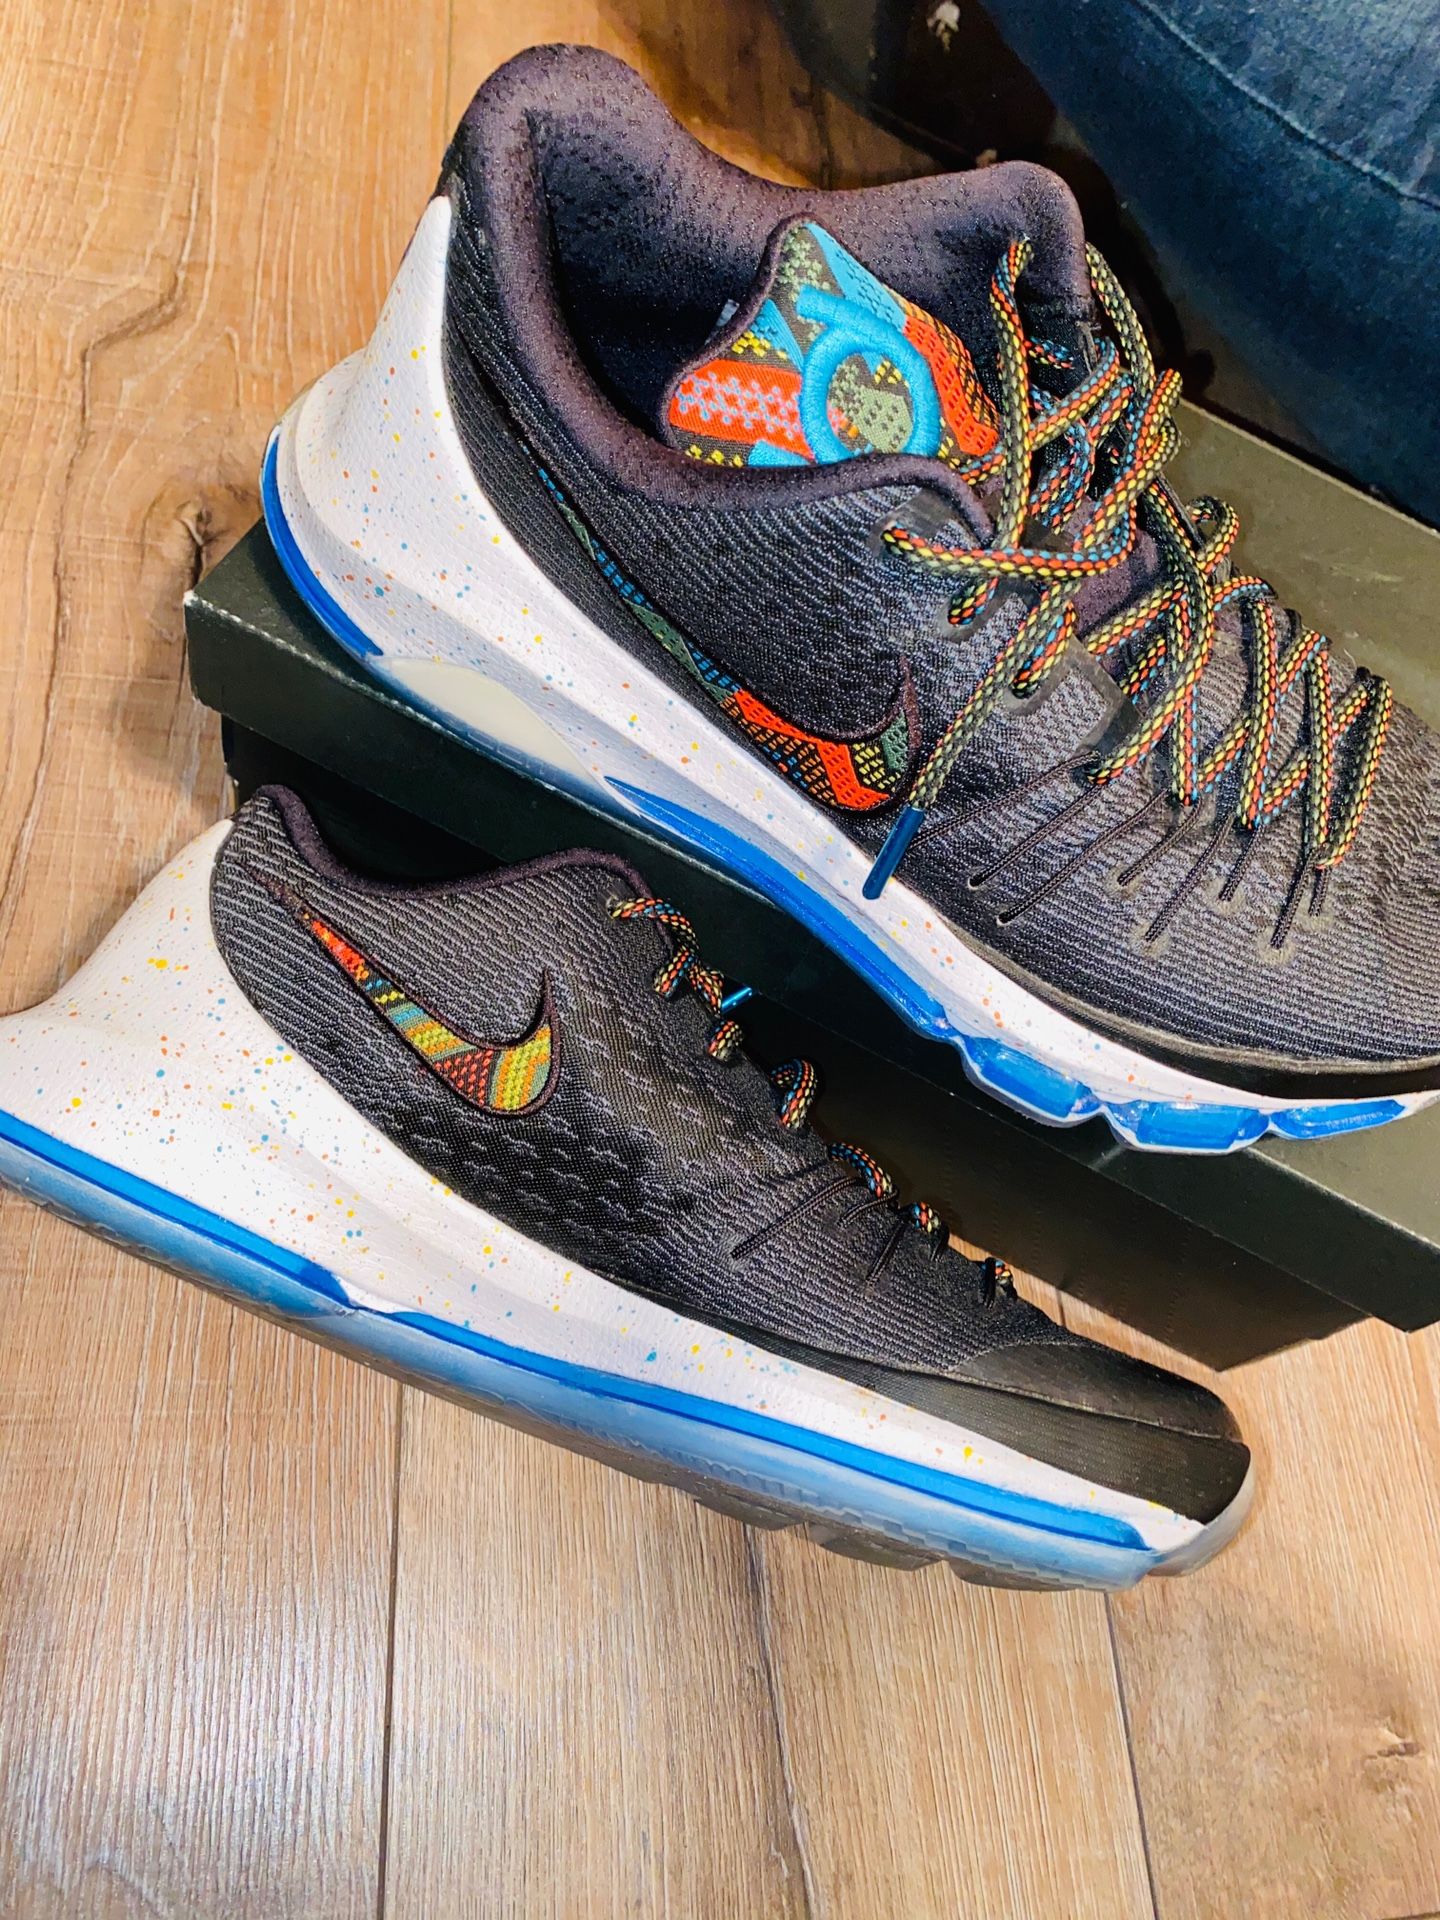 Nike KD Black History Month Shoes